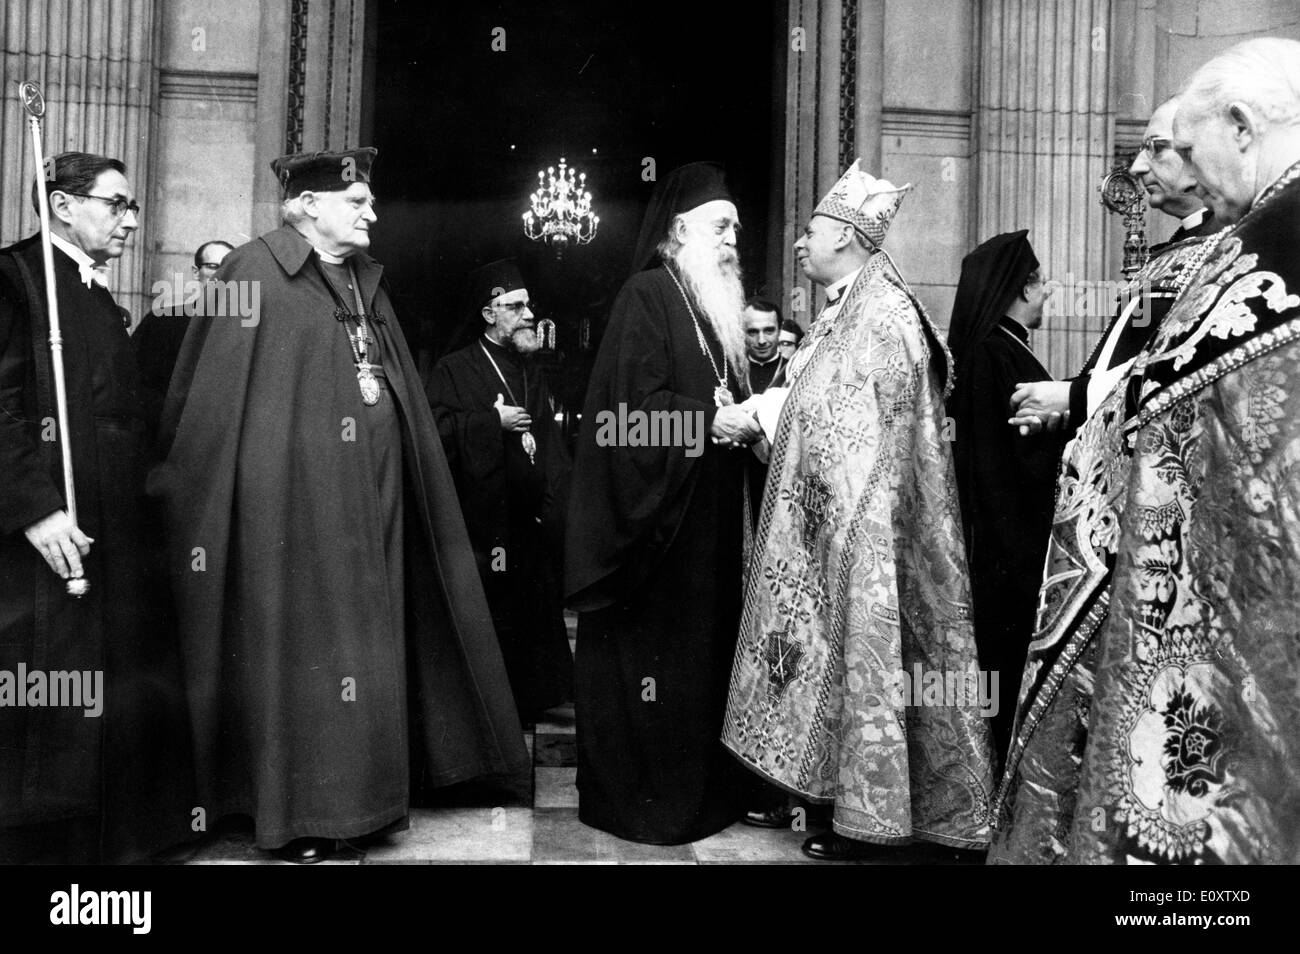 Nov 14, 1967; London, UK; His all Holiness PATRIARCH ATHENAGORAS I, Archbishop of Constantinople and Oecumenical Patriarch, yesterday visited St. Paul's Cathedral to be conducted to the High Altar where the Book of Gospels was opened for him to kiss. The Patriarch is the guest of the Archbishop of Canterbury and is staying at Lambeth Palace. The picture shows the Patriarch saying goodbye to the Bishop of London, Dr. ROBERT STOPFORD, whilst the ARCHBISHOP OF CANTERBURY, Dr. RAMSEY (L), looks on. Stock Photo